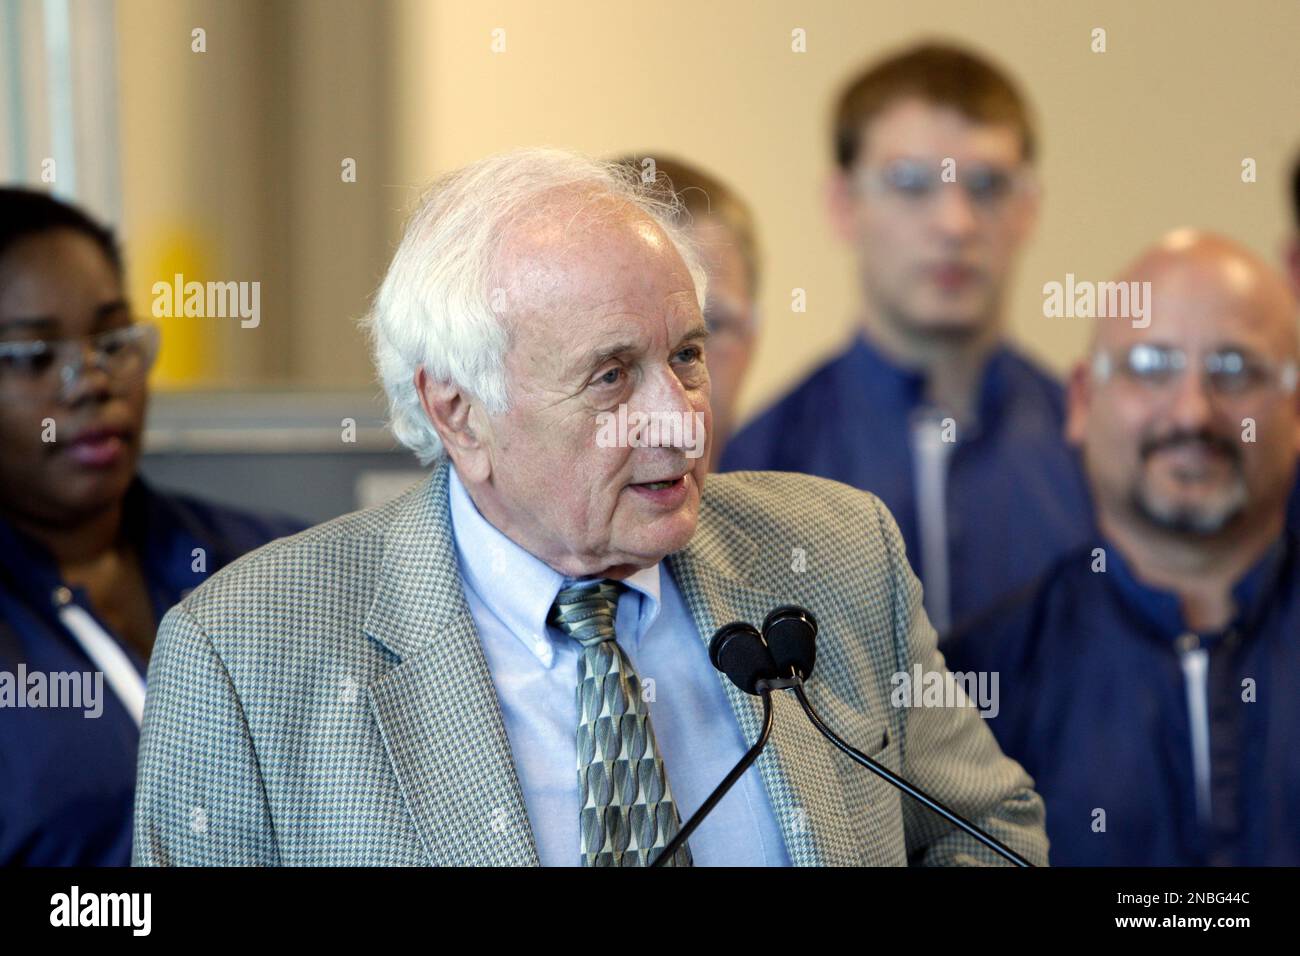 U.S. Rep. Sander Levin, D-Mich., addresses the media at A123 Systems in Romulus, Mich., Monday, July 18, 2011. (AP Photo/Carlos Osorio) Stock Photo